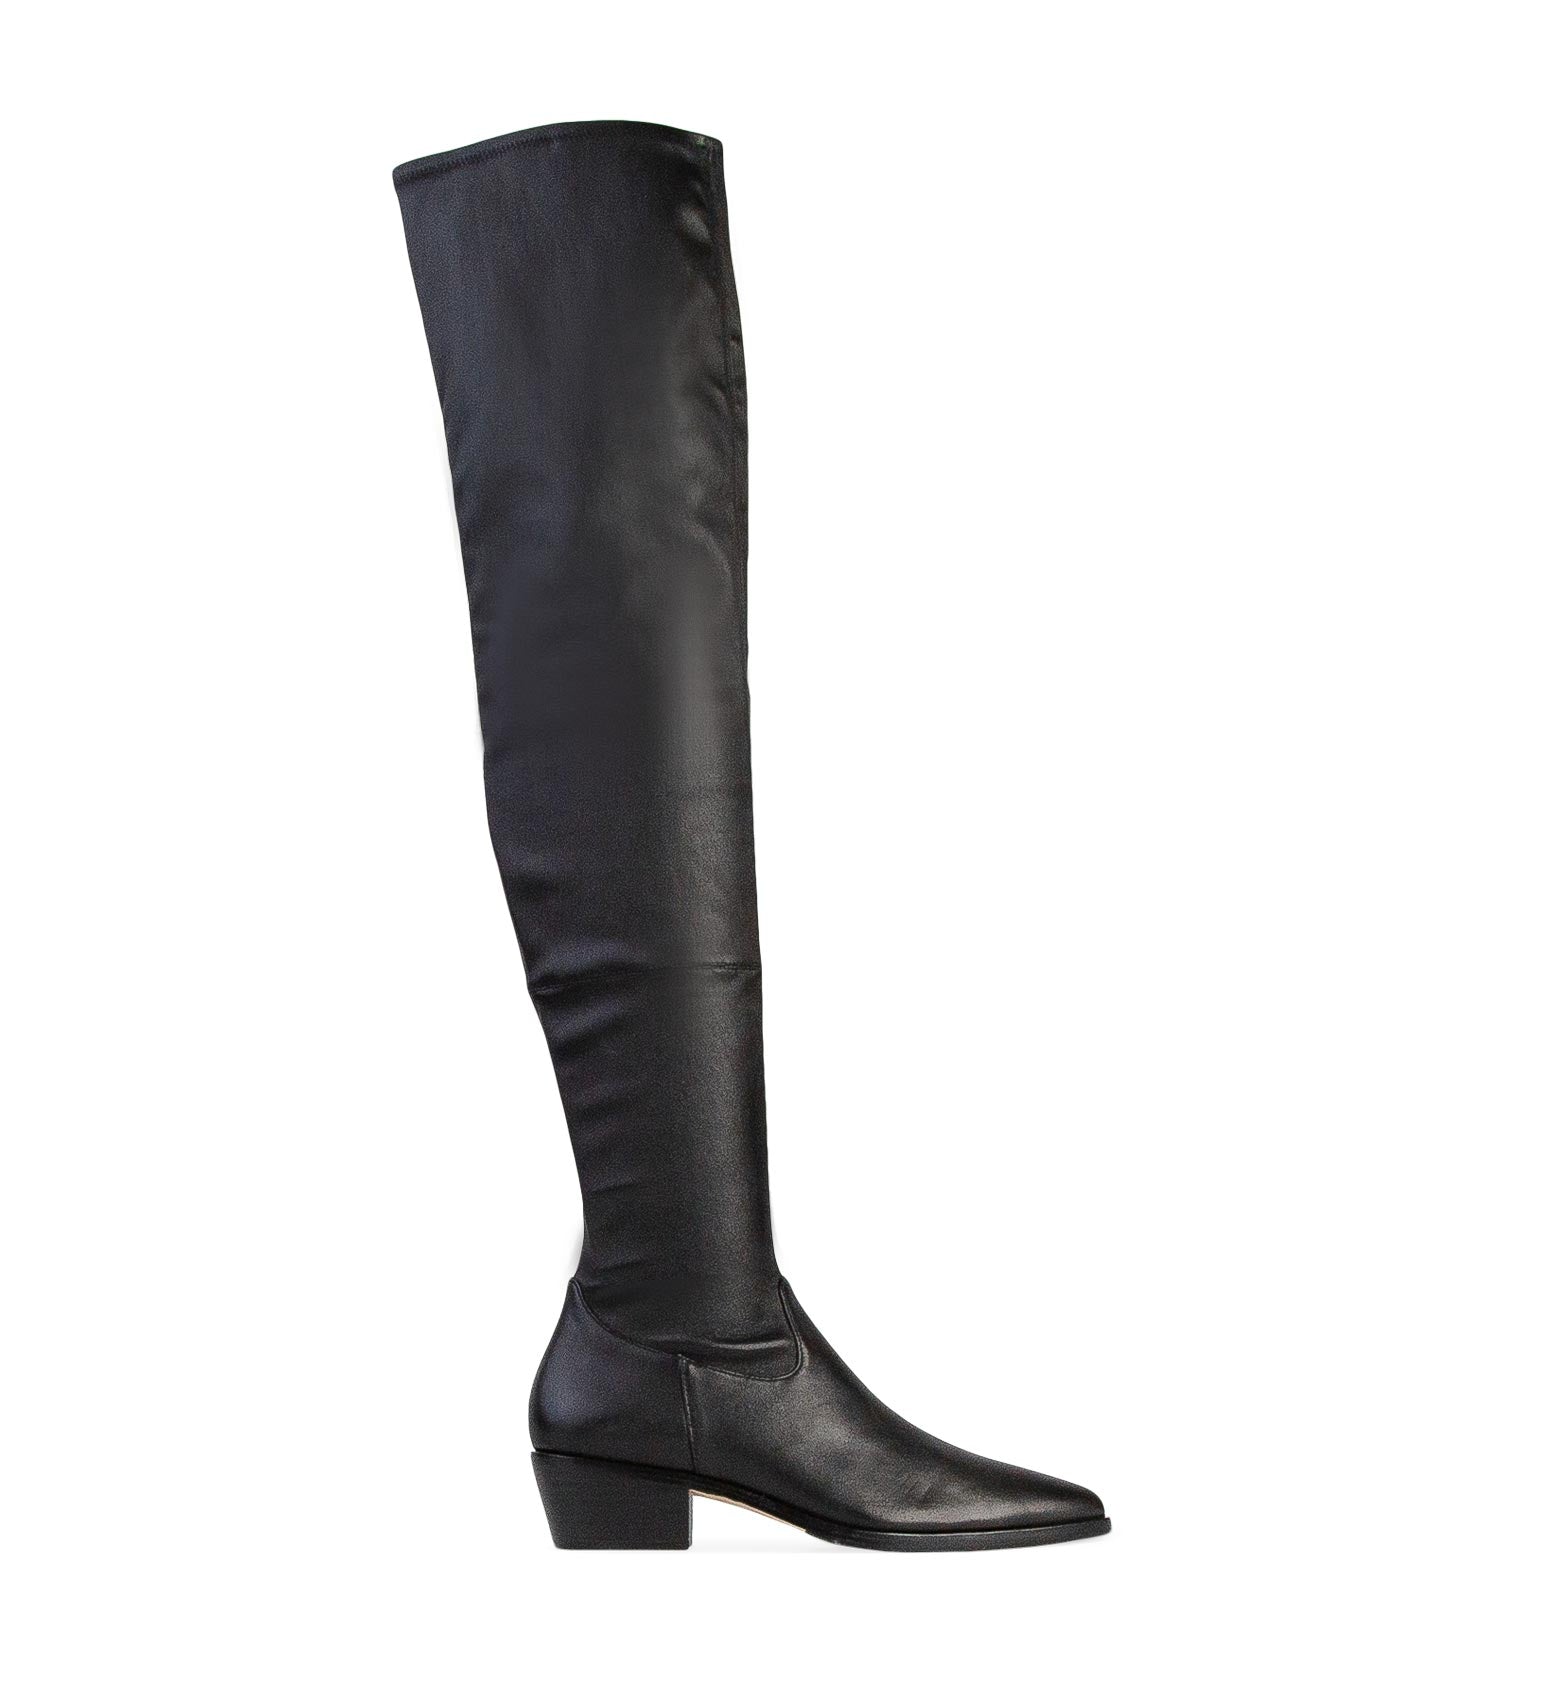 Woodstar Black Stretch Leather Over the Knee Boots | Bared Footwear